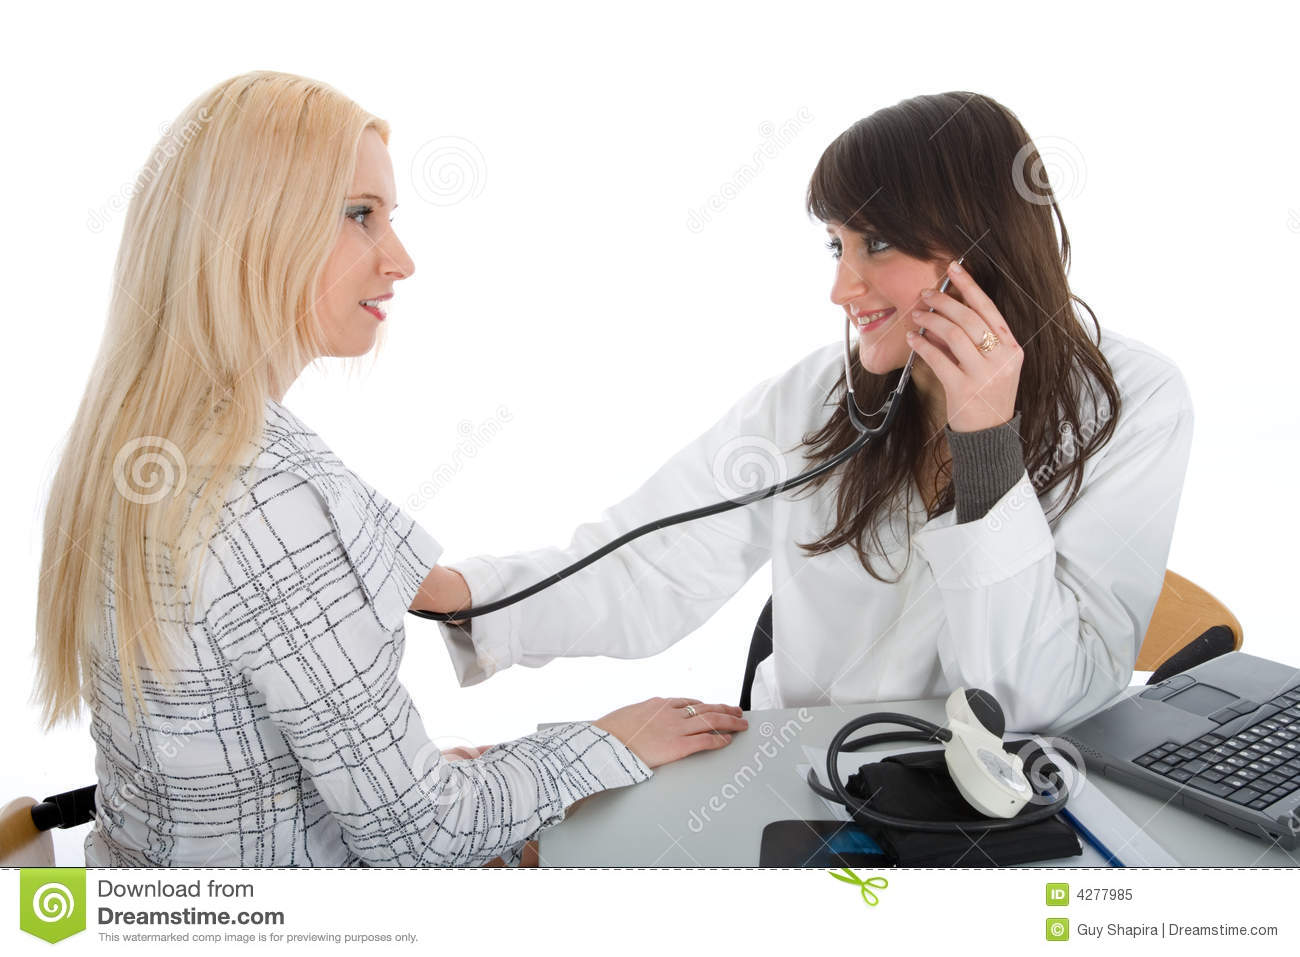 Royalty Free Images Doctor and Patient